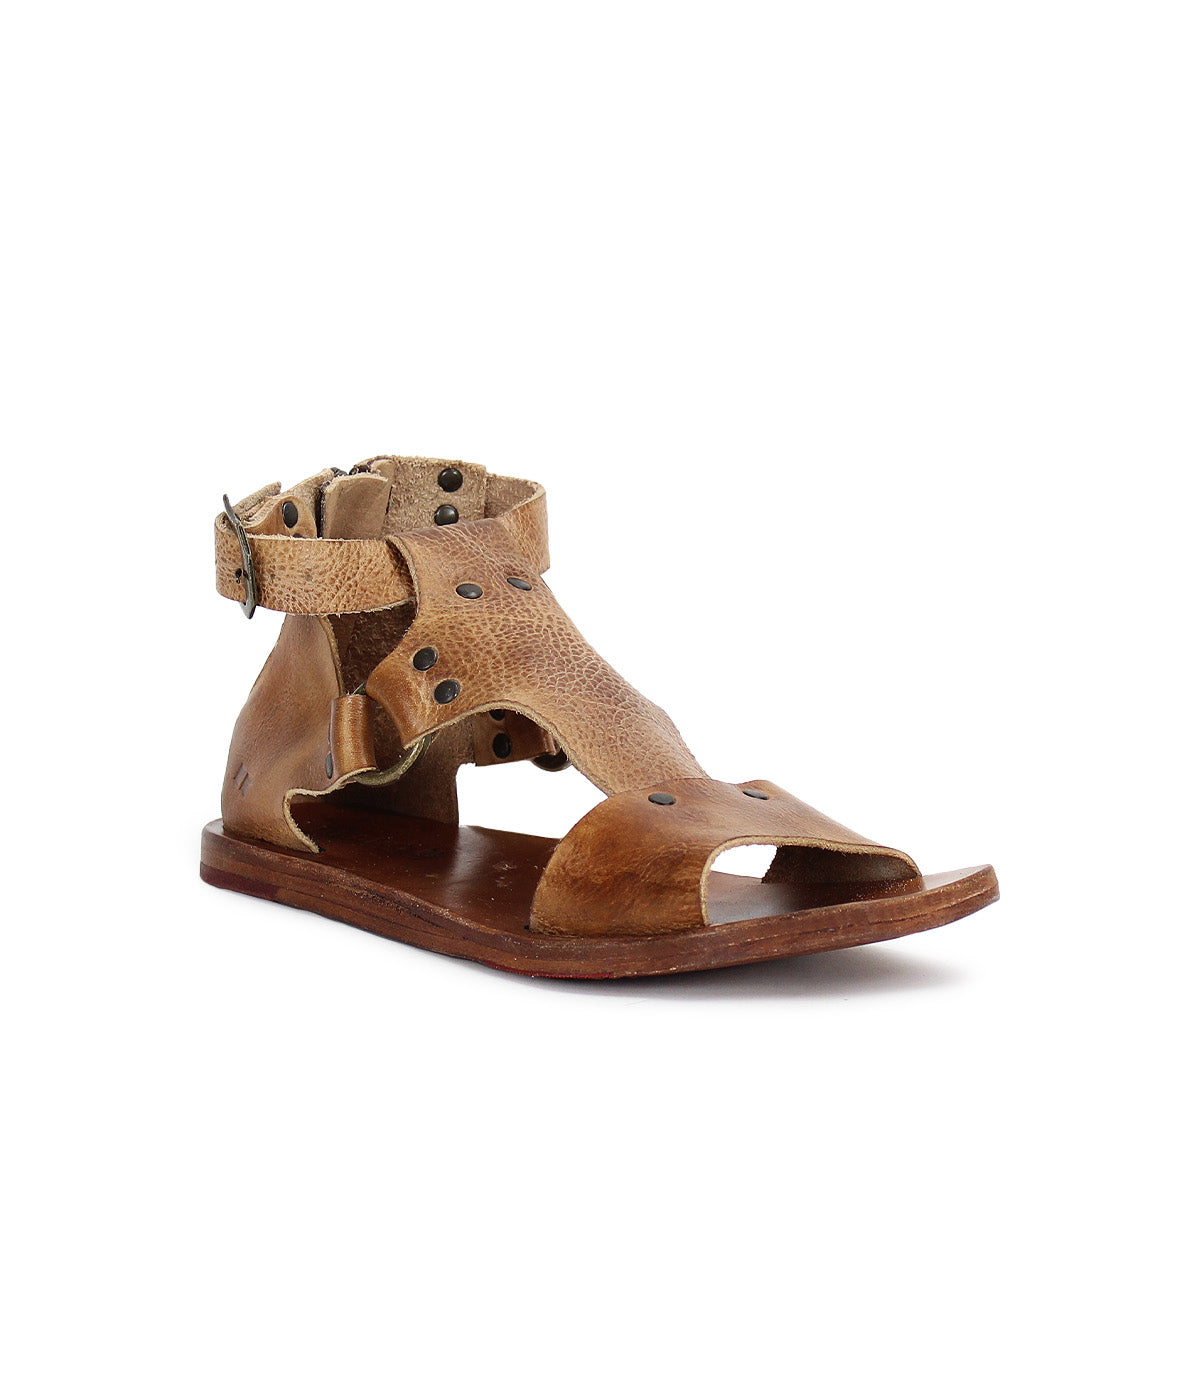 A pair of Voleta women's sandals in tan leather by Bed Stu.